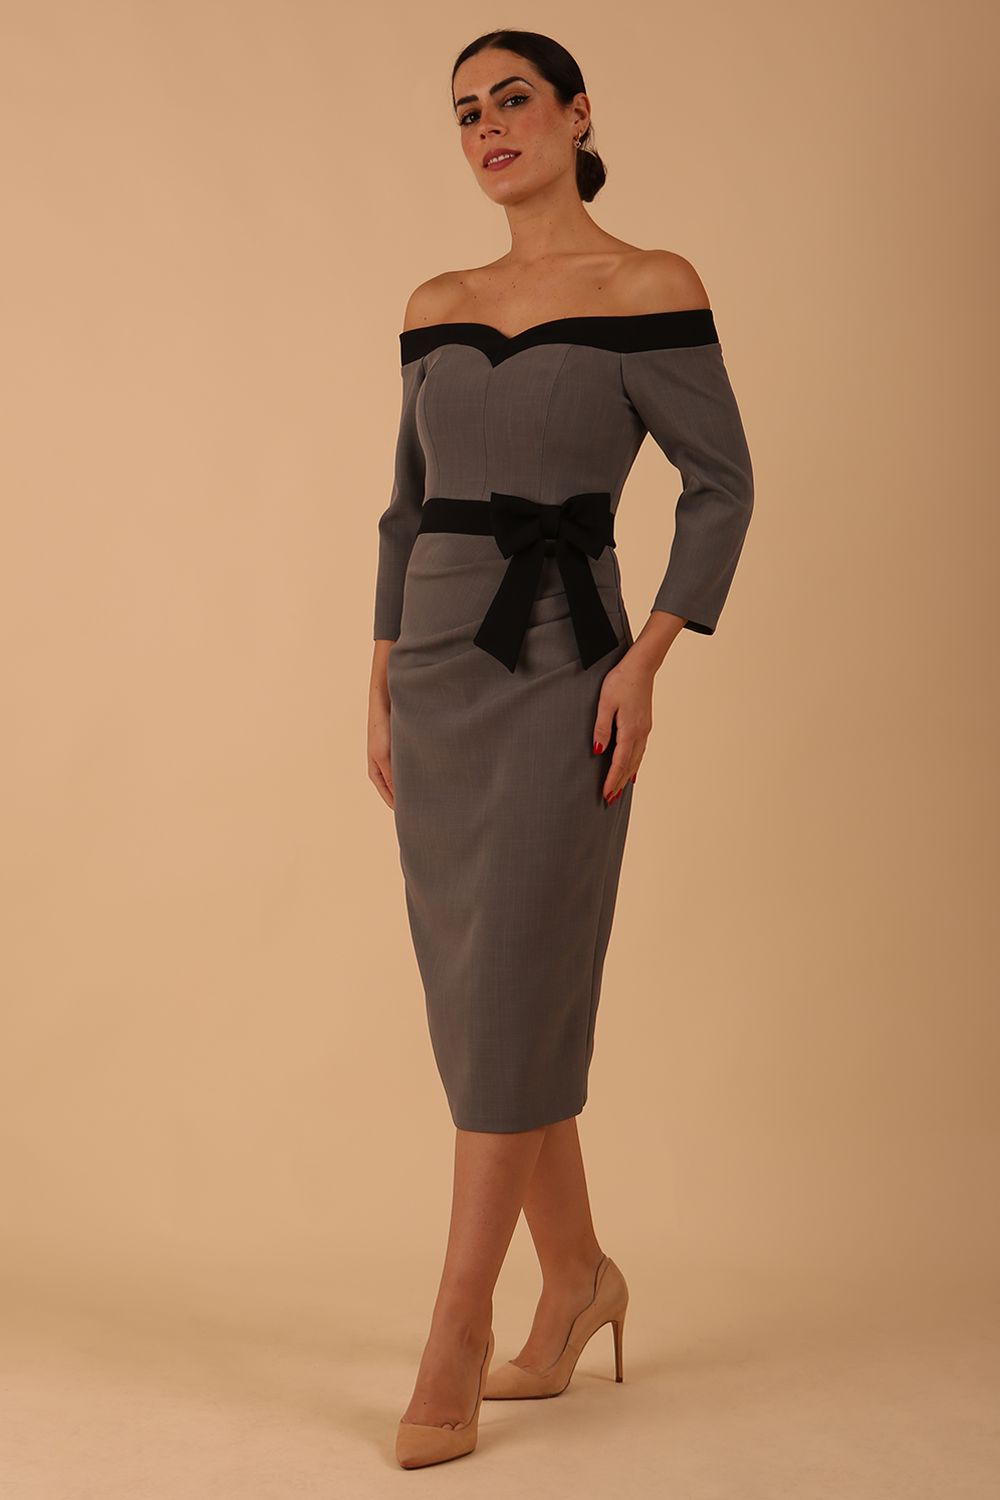 Model wearing a diva catwalk Brittany Off Shoulder Bow detail Pencil Dress with 3/4 sleeves and knee length in Sandshell Beige and Black colour 